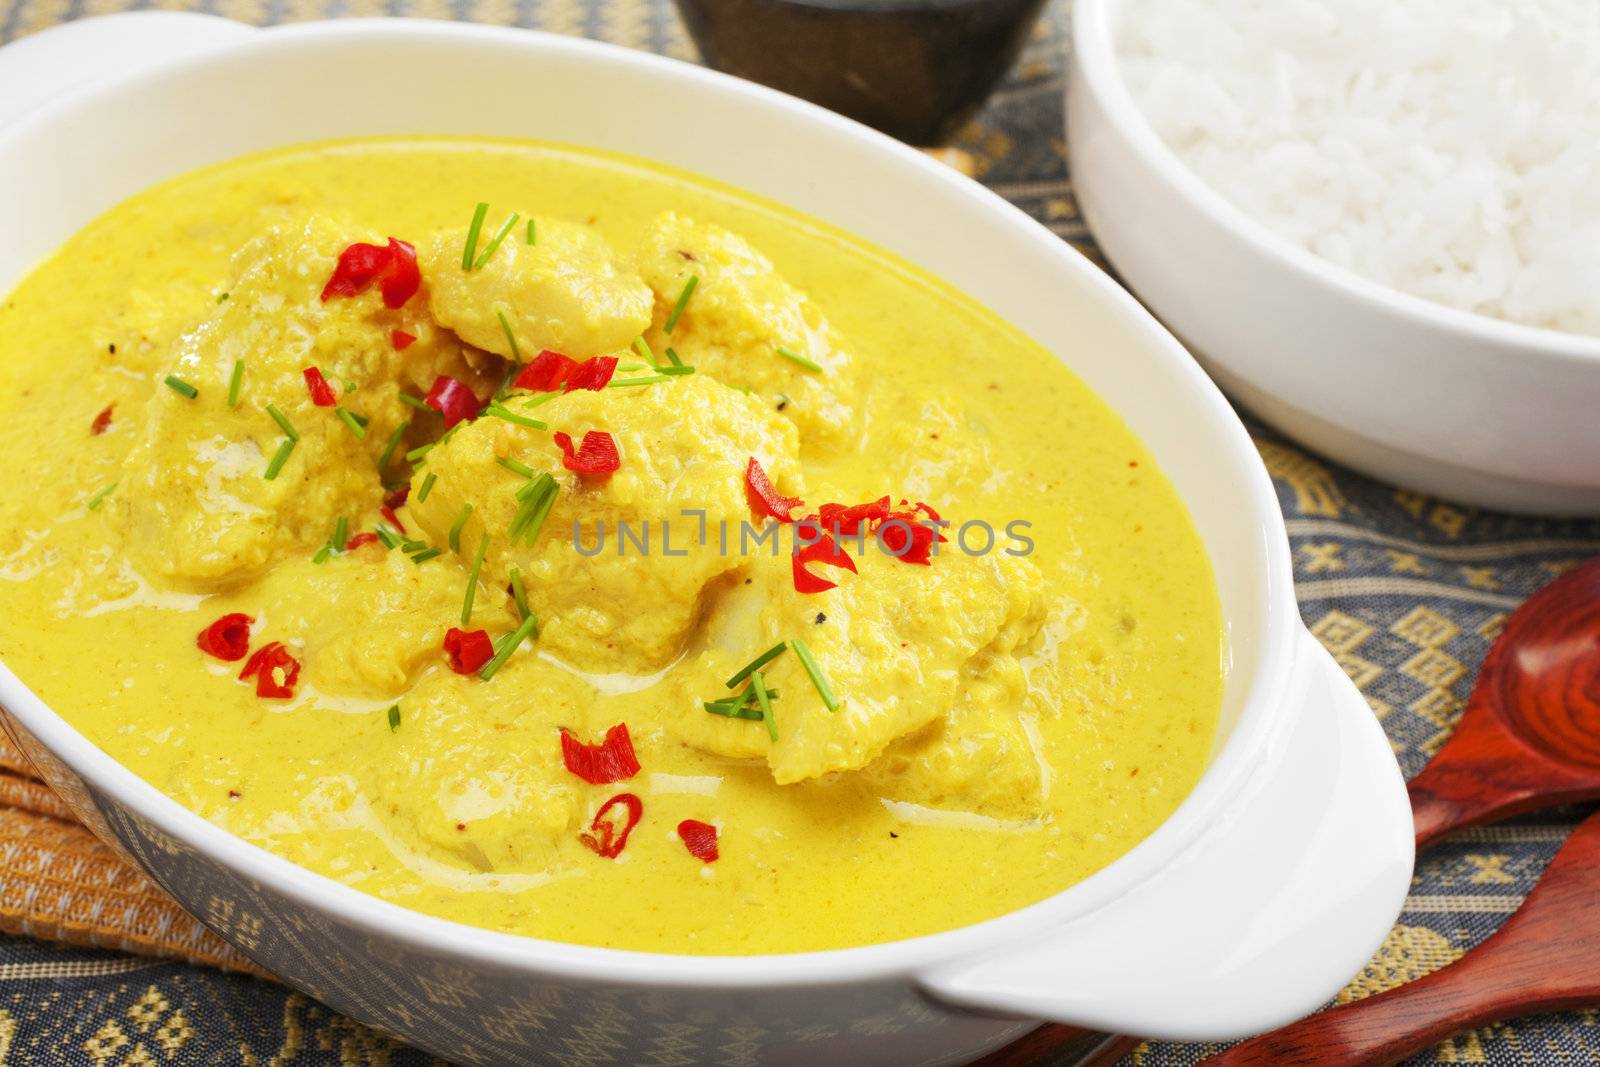 Fish cooked in spicy coconut sauce, garnished with chilli and chives,  and served with basmati rice.